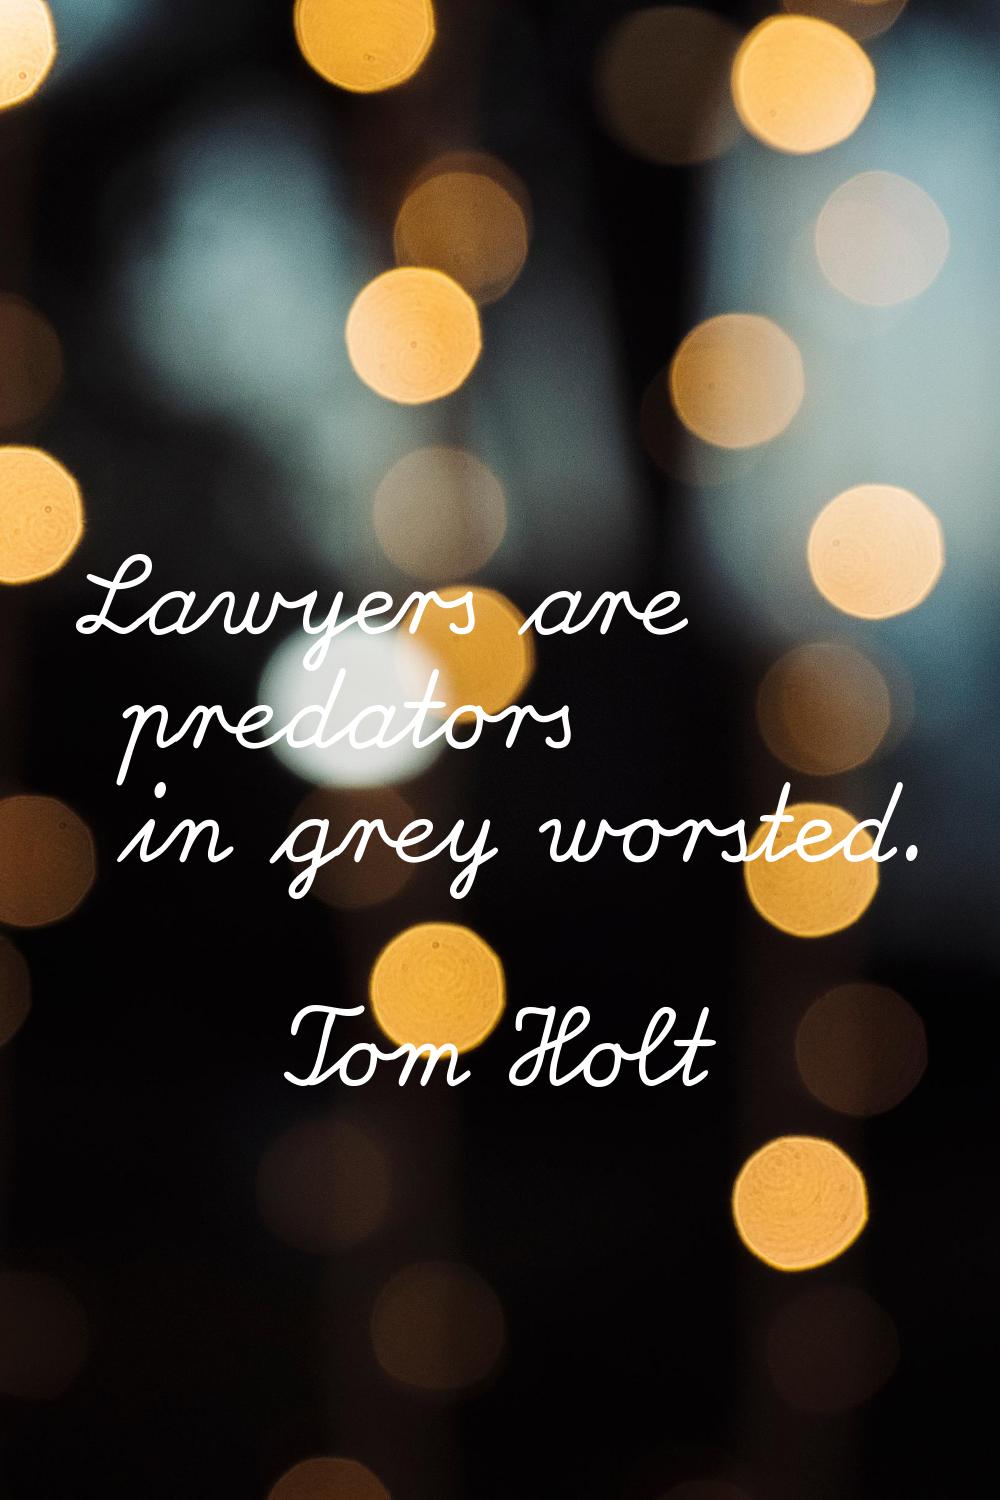 Lawyers are predators in grey worsted.